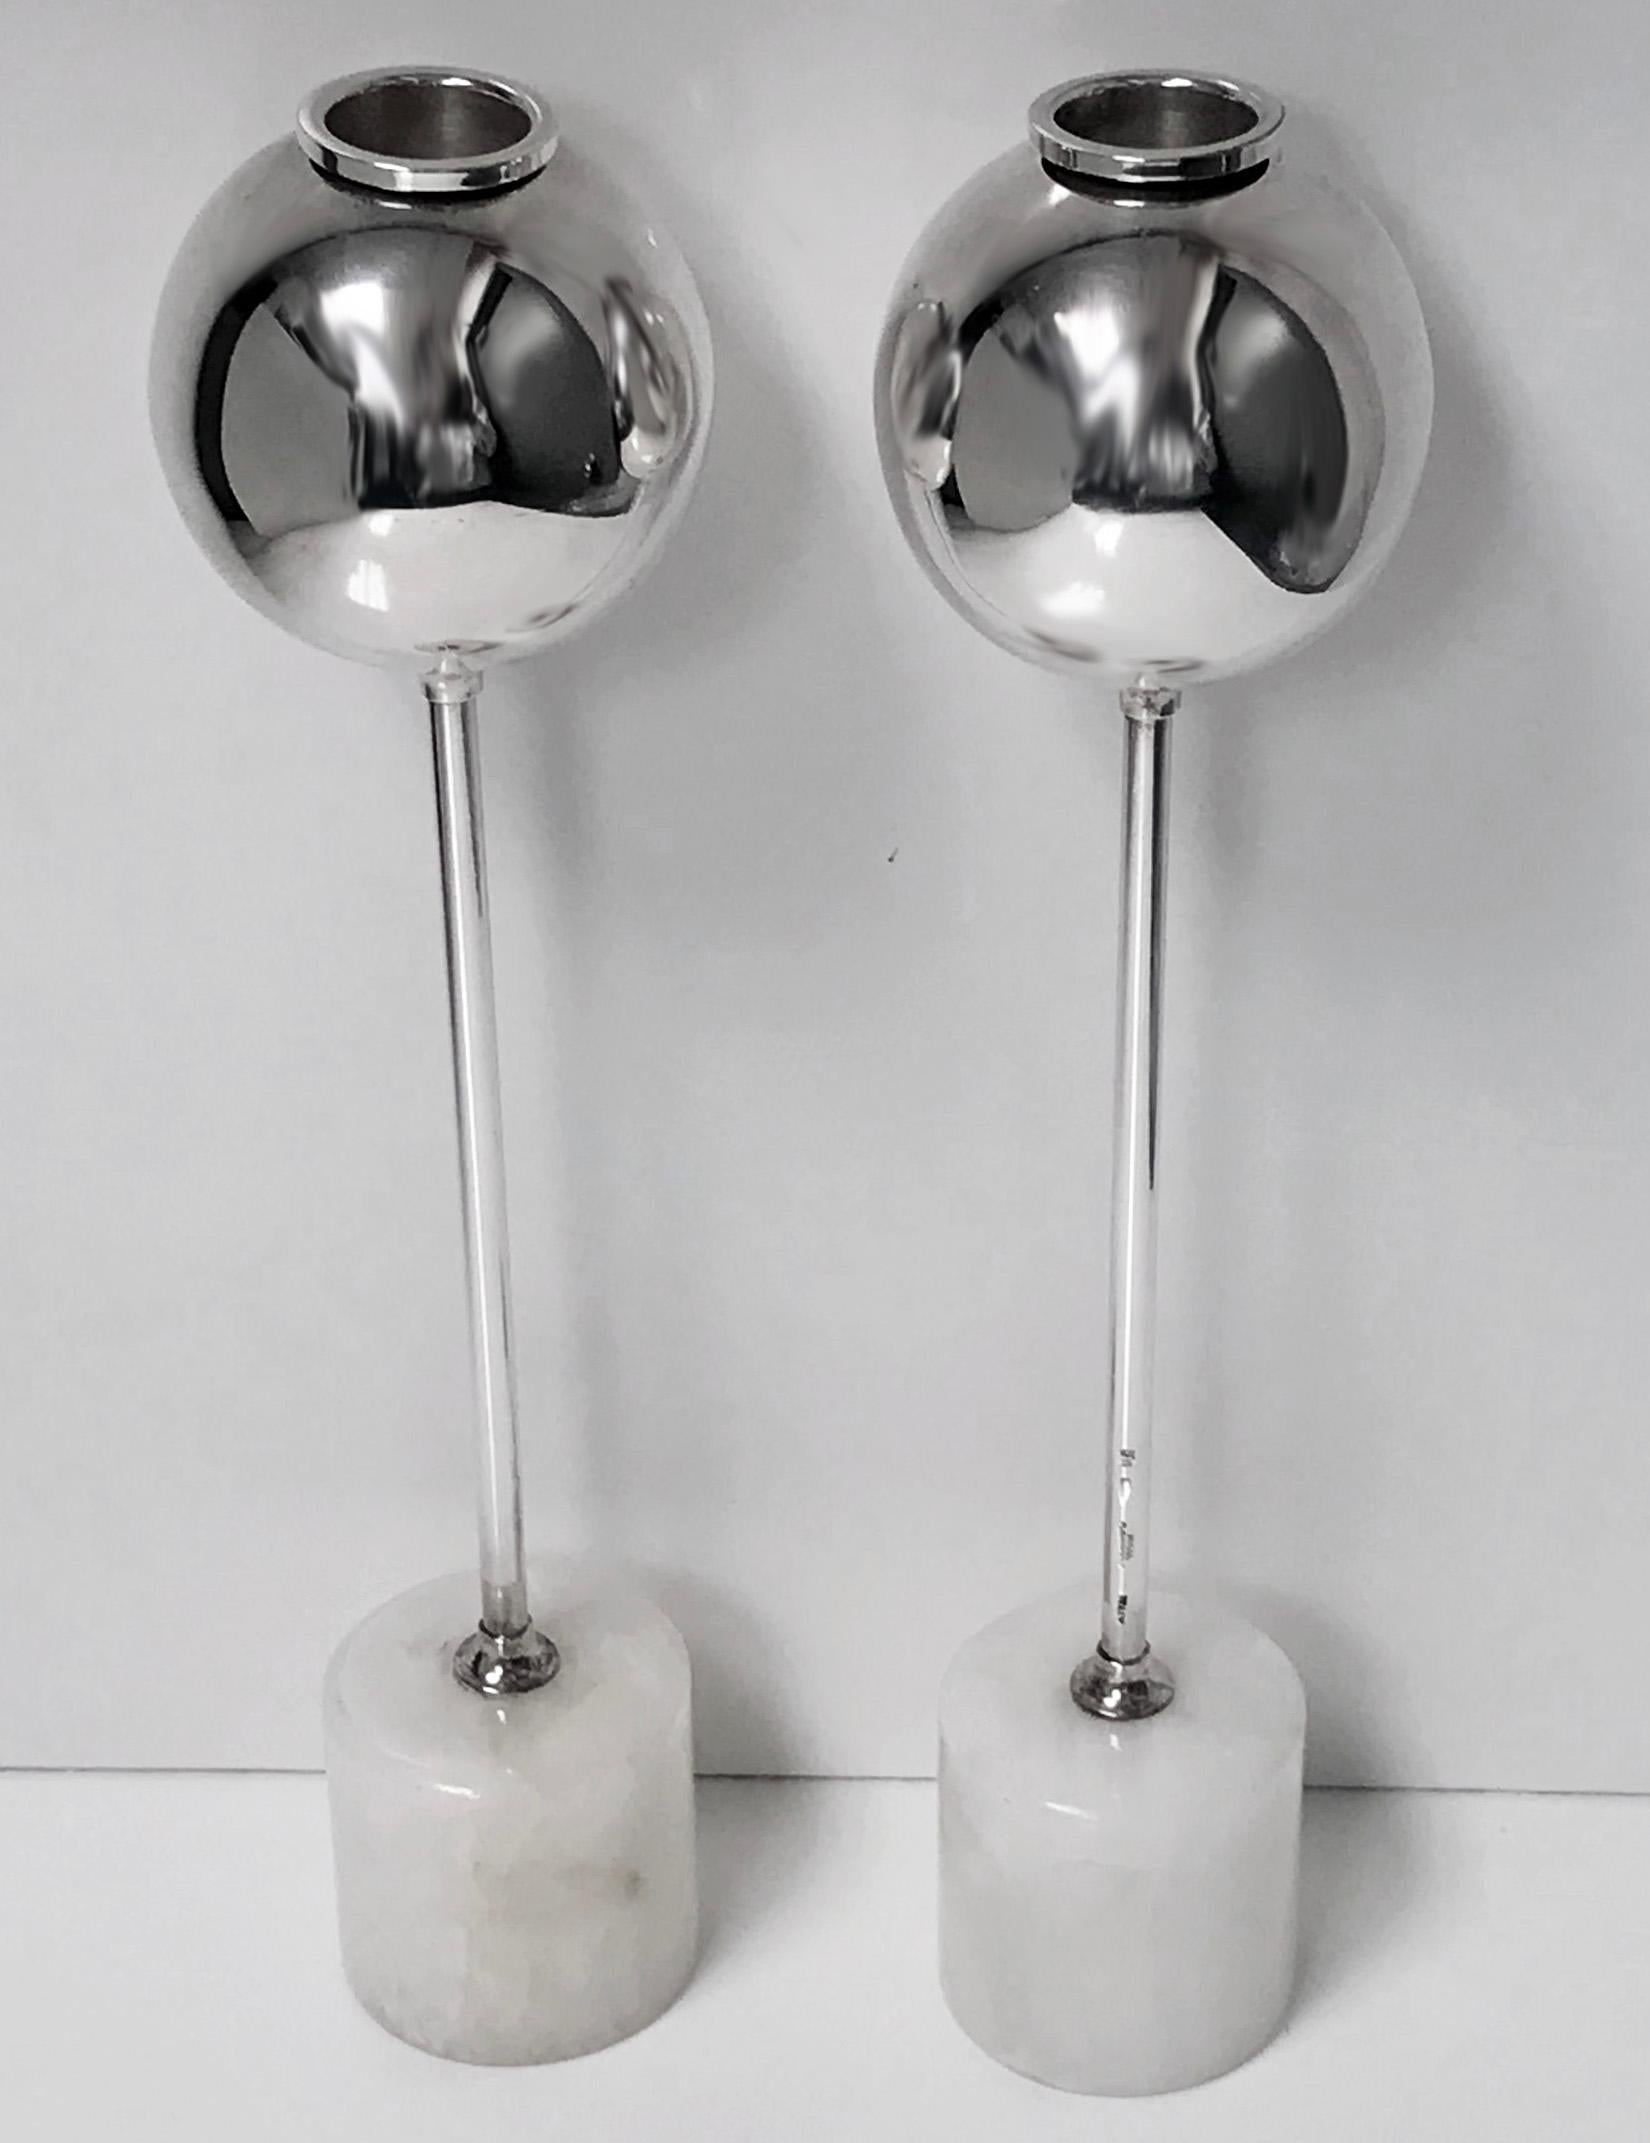 Midcentury Christofle rare design candlesticks, convertible to vases. Each of spherical form on long tubular stems surmounted on white marble cylindrical bases. Stems with full Christofle Gallia marks. Nozzles removable to allow for use as vases.